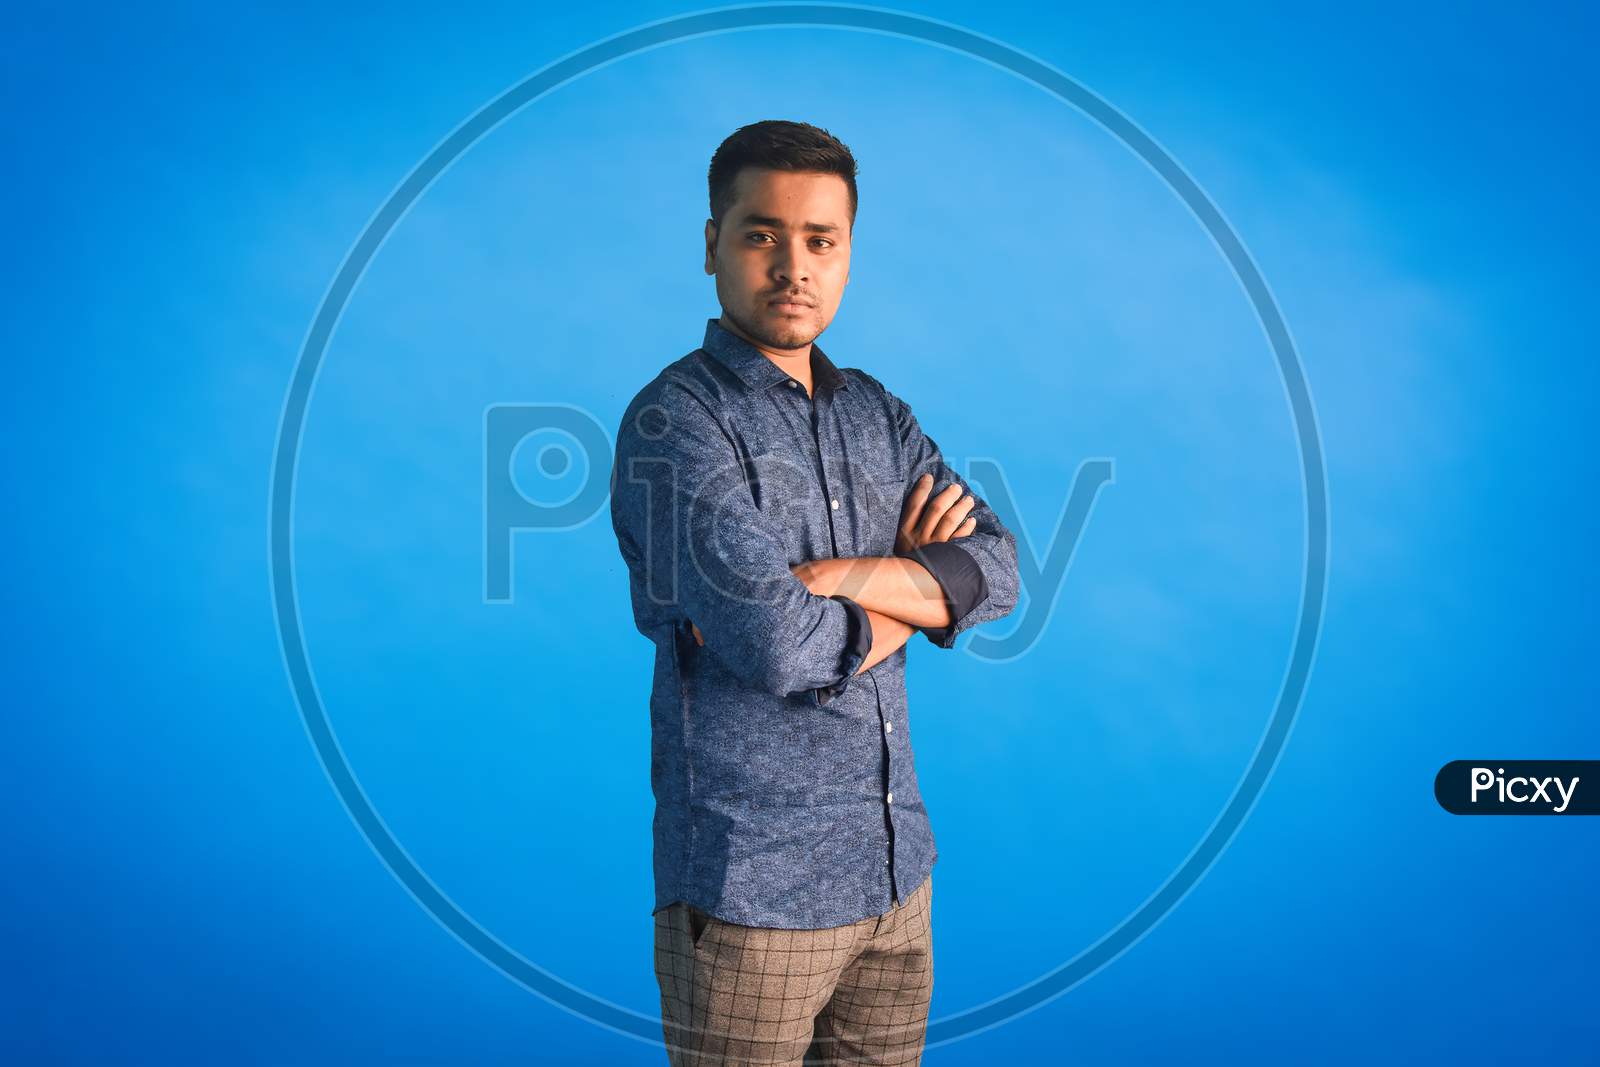 Portrait of serious Indian arm folded man standing on a blue background.